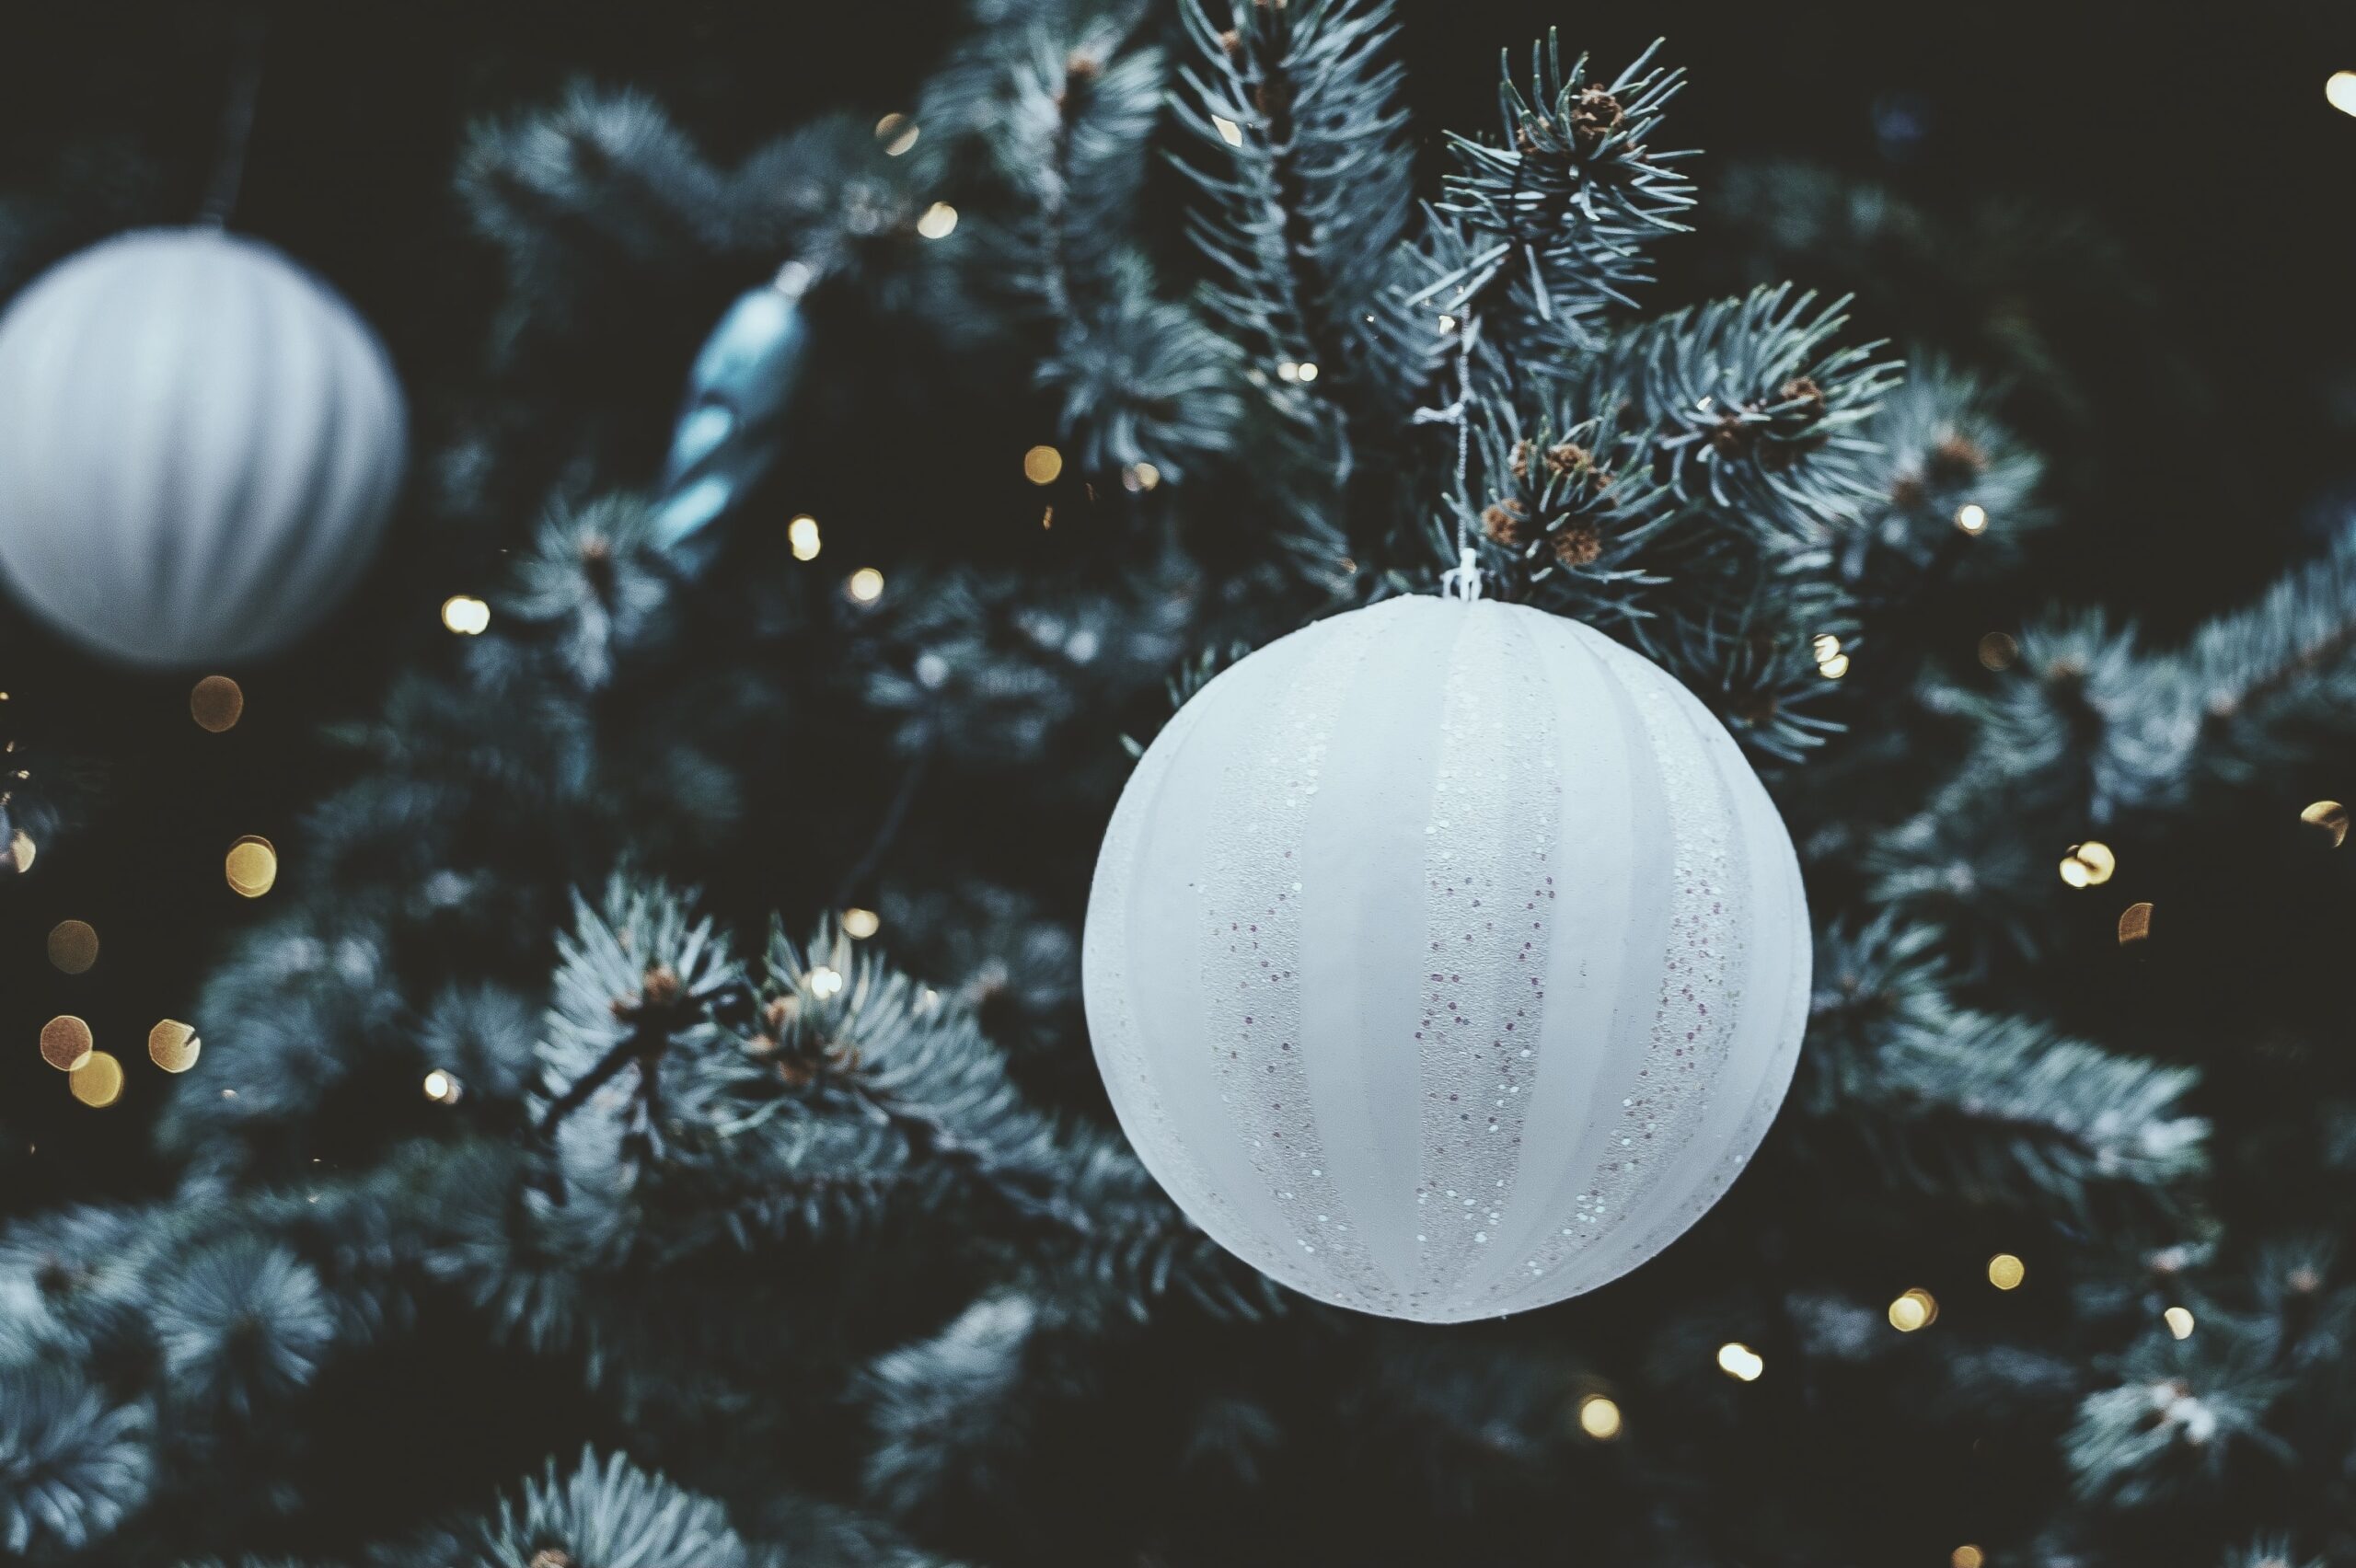 The Best Monochrome Christmas Tree Decorations